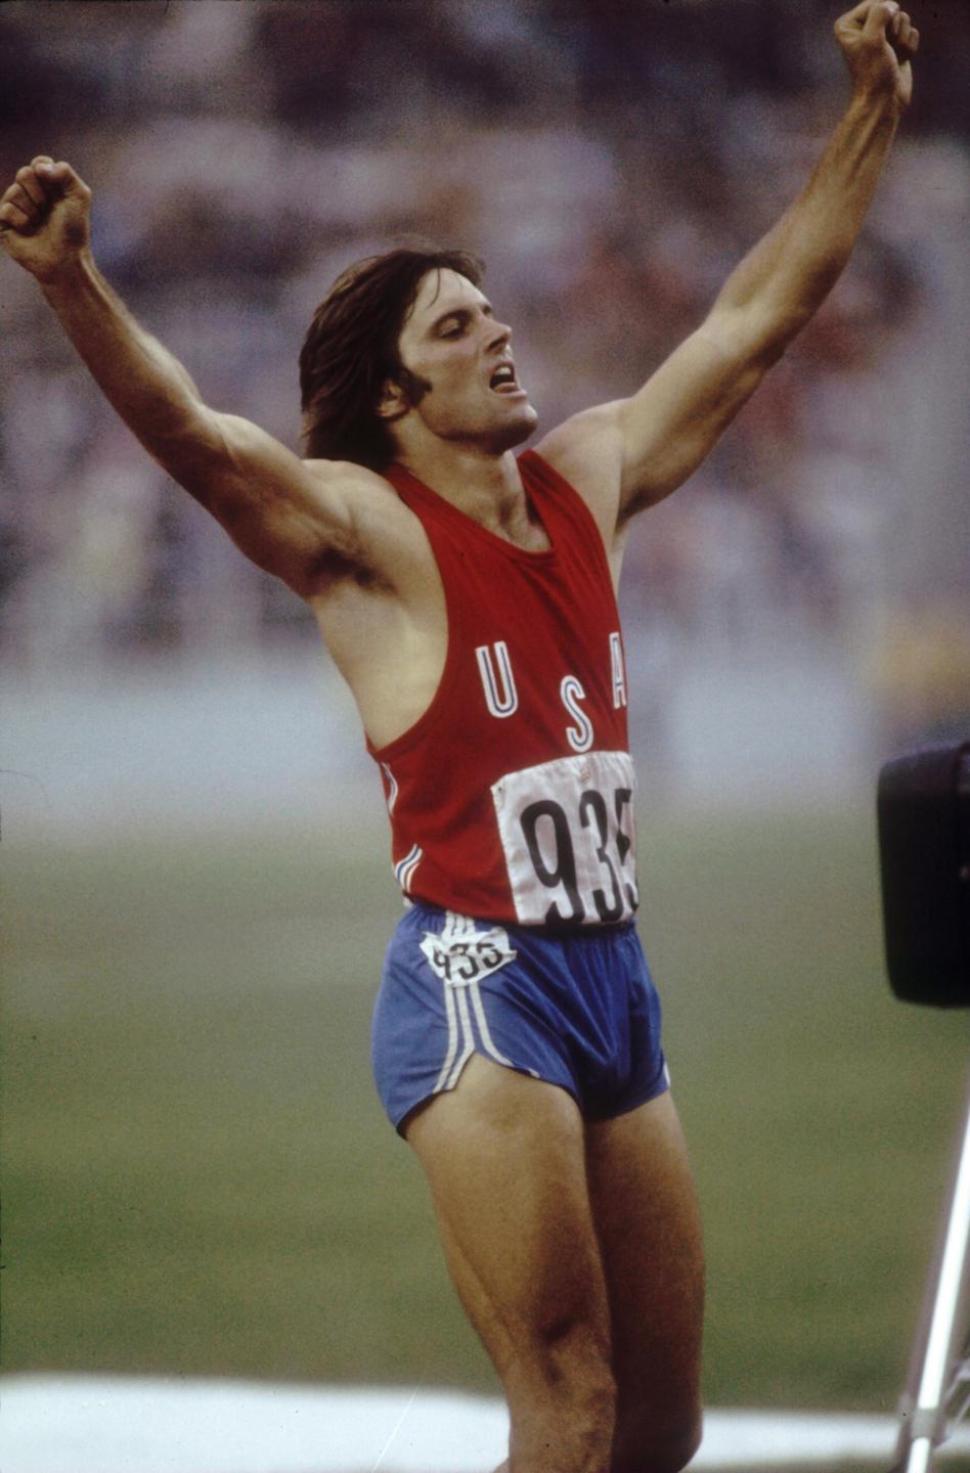 Bruce Jenner celebrates during his record setting performance in the decathlon in the 1976 Summer Olympics in Montreal, Canada.